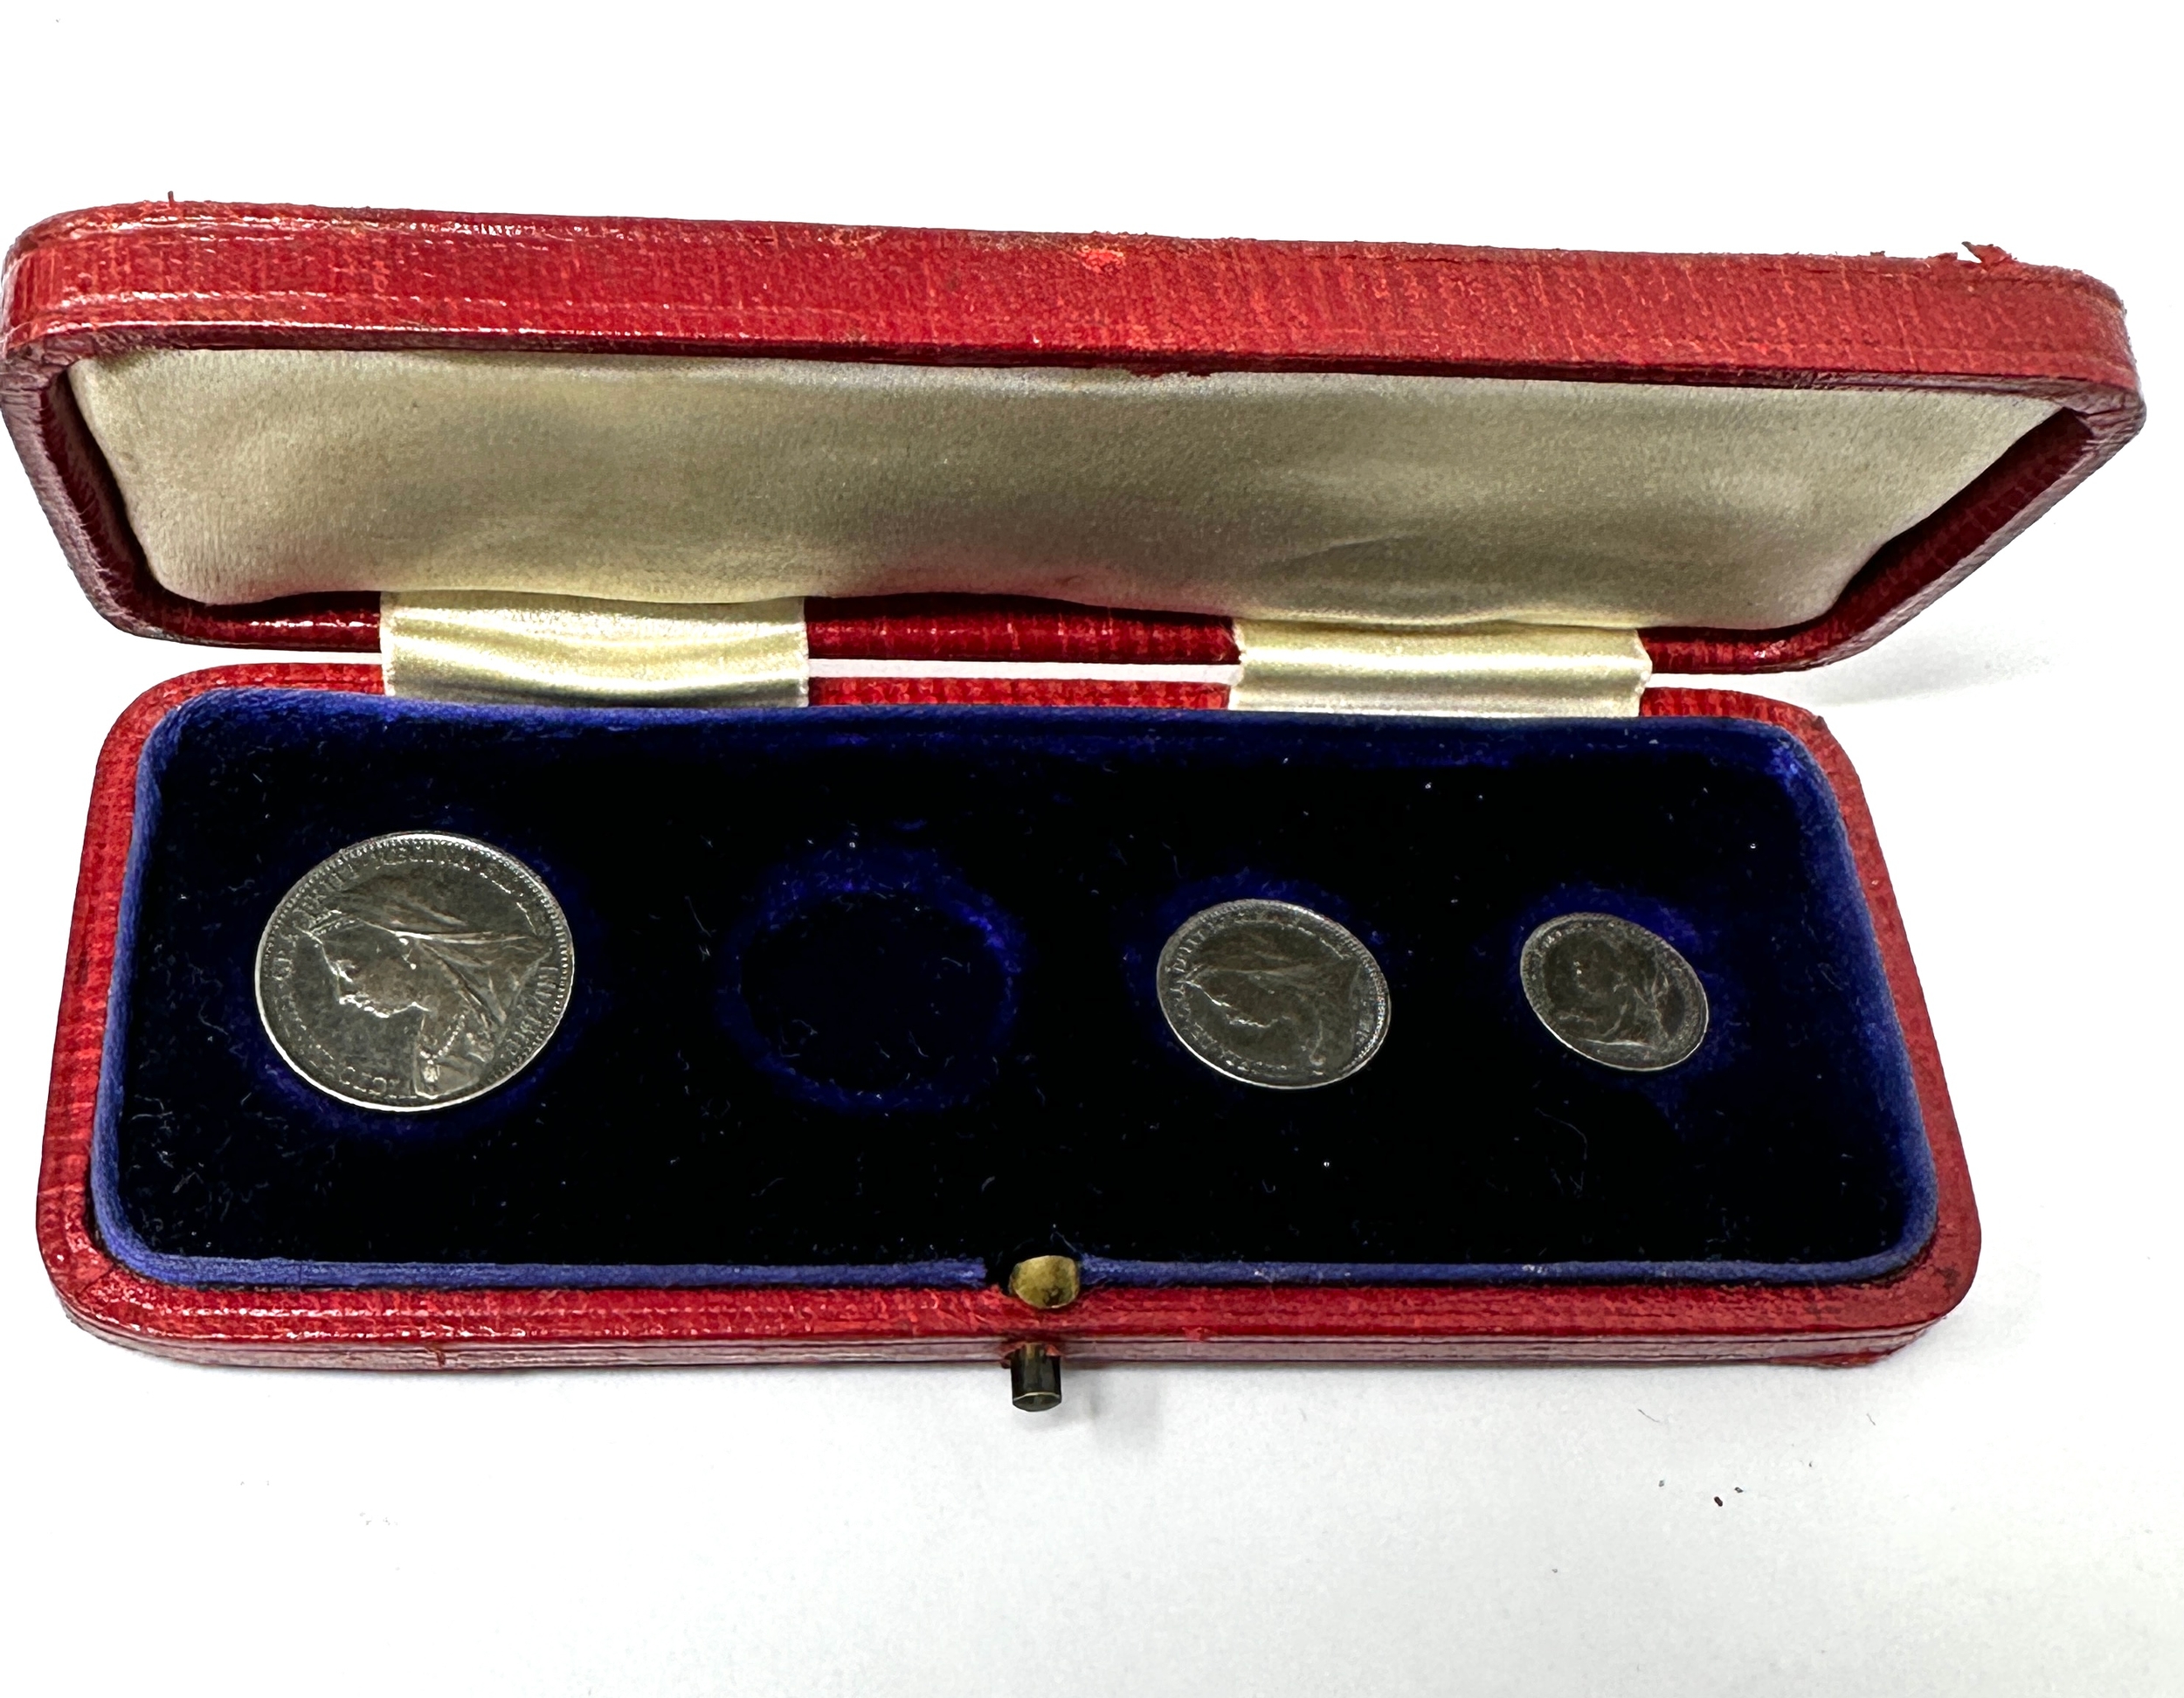 Part Queen Victoria Maundy Coin Set In Original Display Box 1901 UNC Condition missing 3 pence coin - Bild 4 aus 5